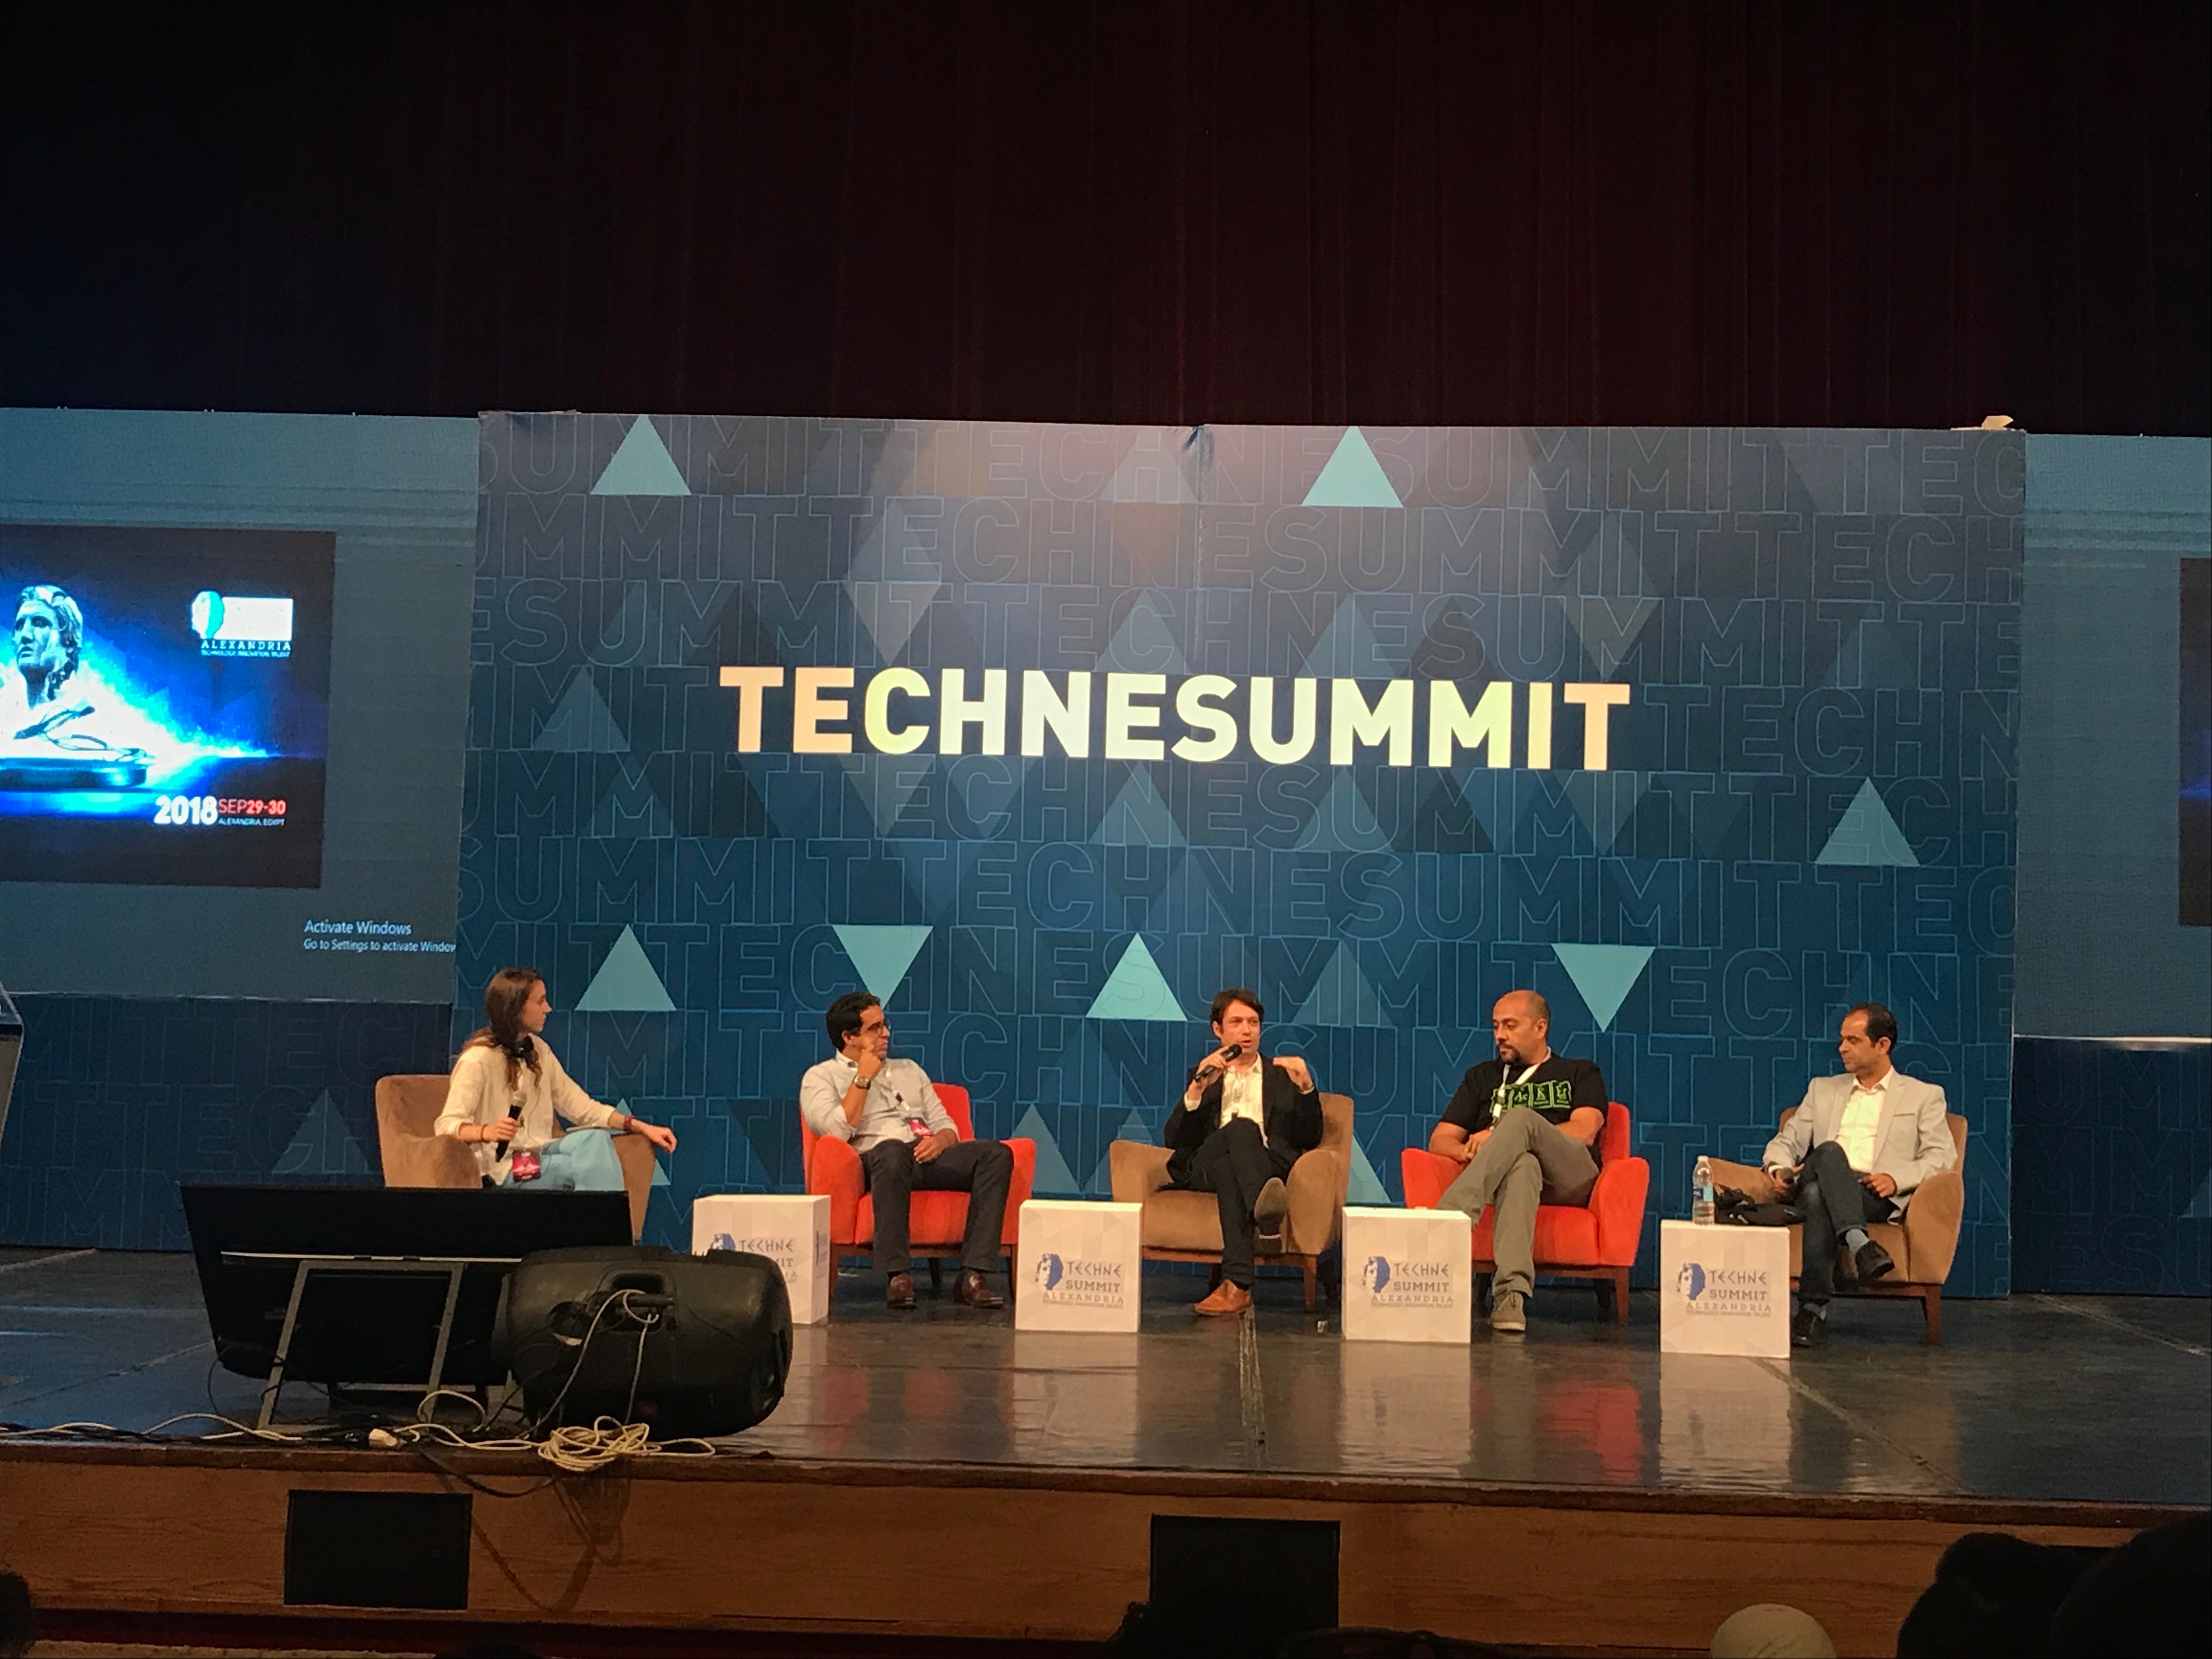 Opening of Techne Summit in the presence of Officials, Local and International Experts